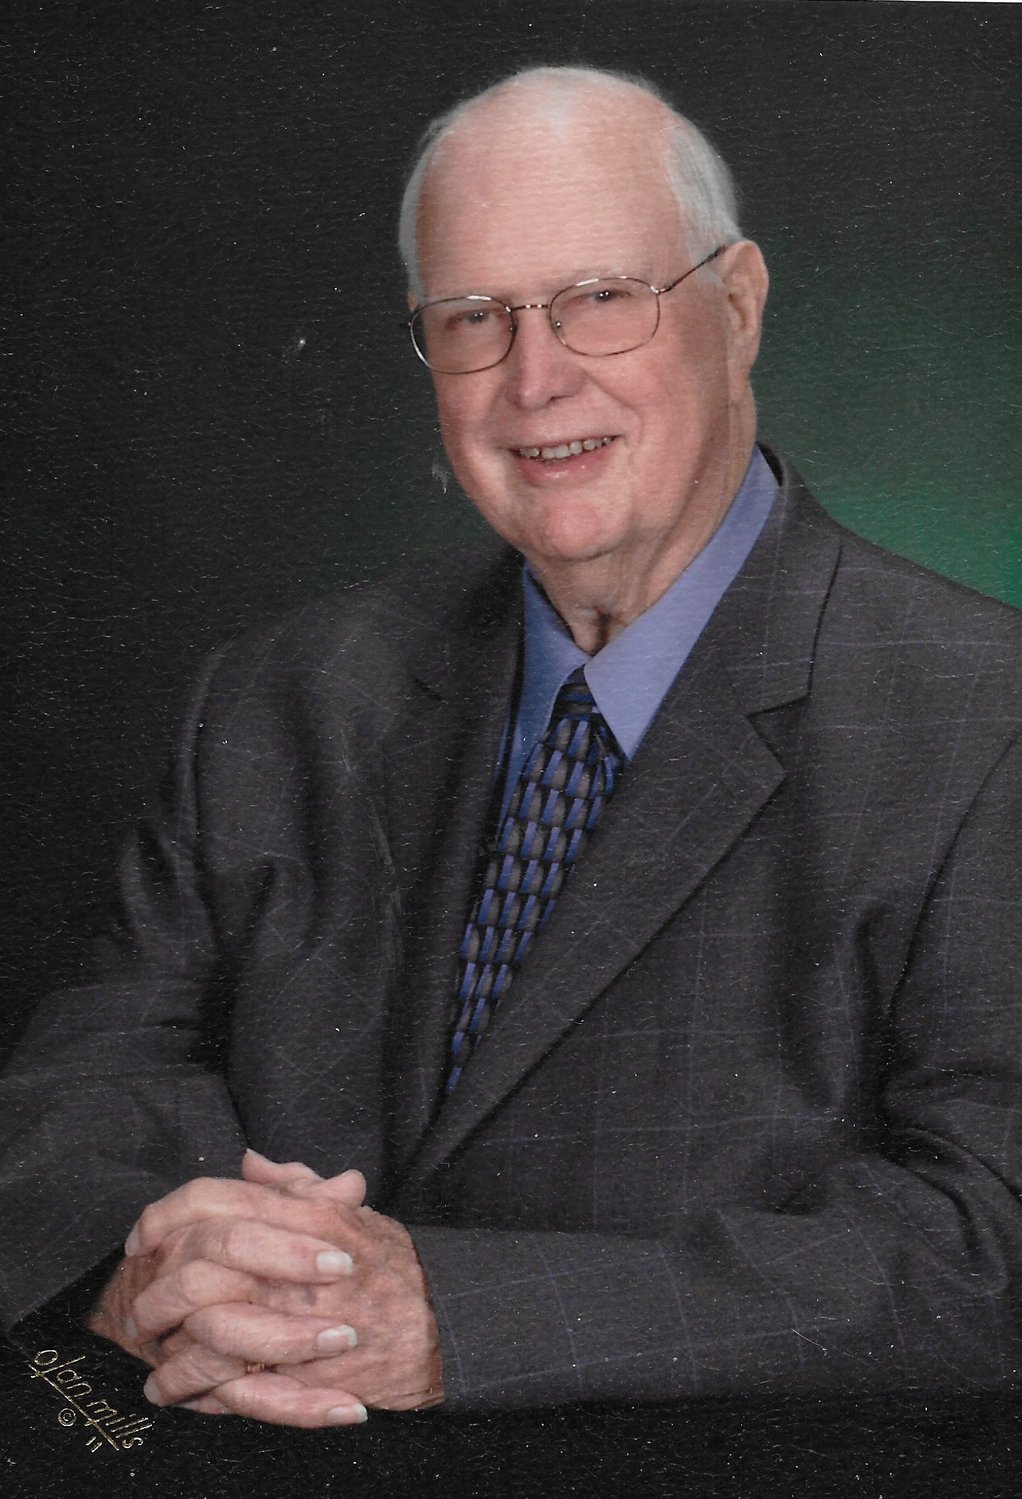 Billy Don Williams passed away Sept. 7 at his home in Katy. Billy Don was a mathematics teacher and guidance counselor for Katy ISD. He was also a loving husband and father who loved his community.